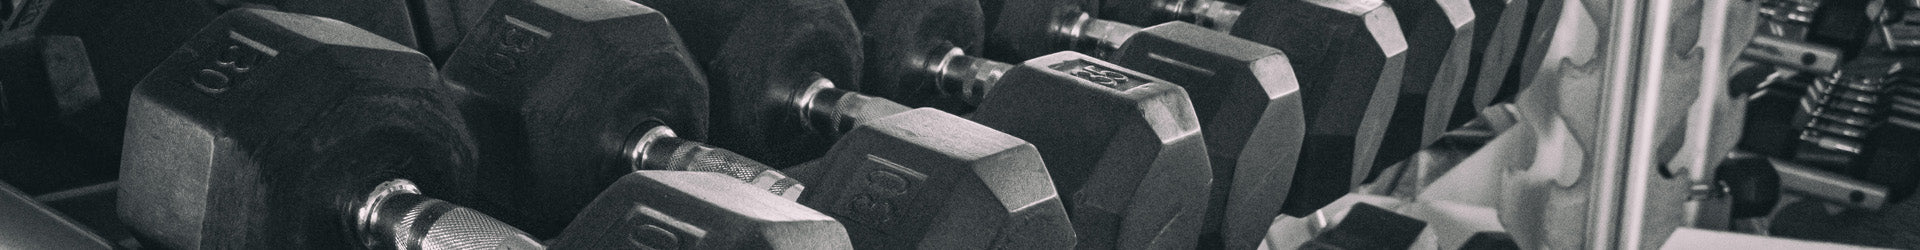 Equipped Gym - Dumbbells